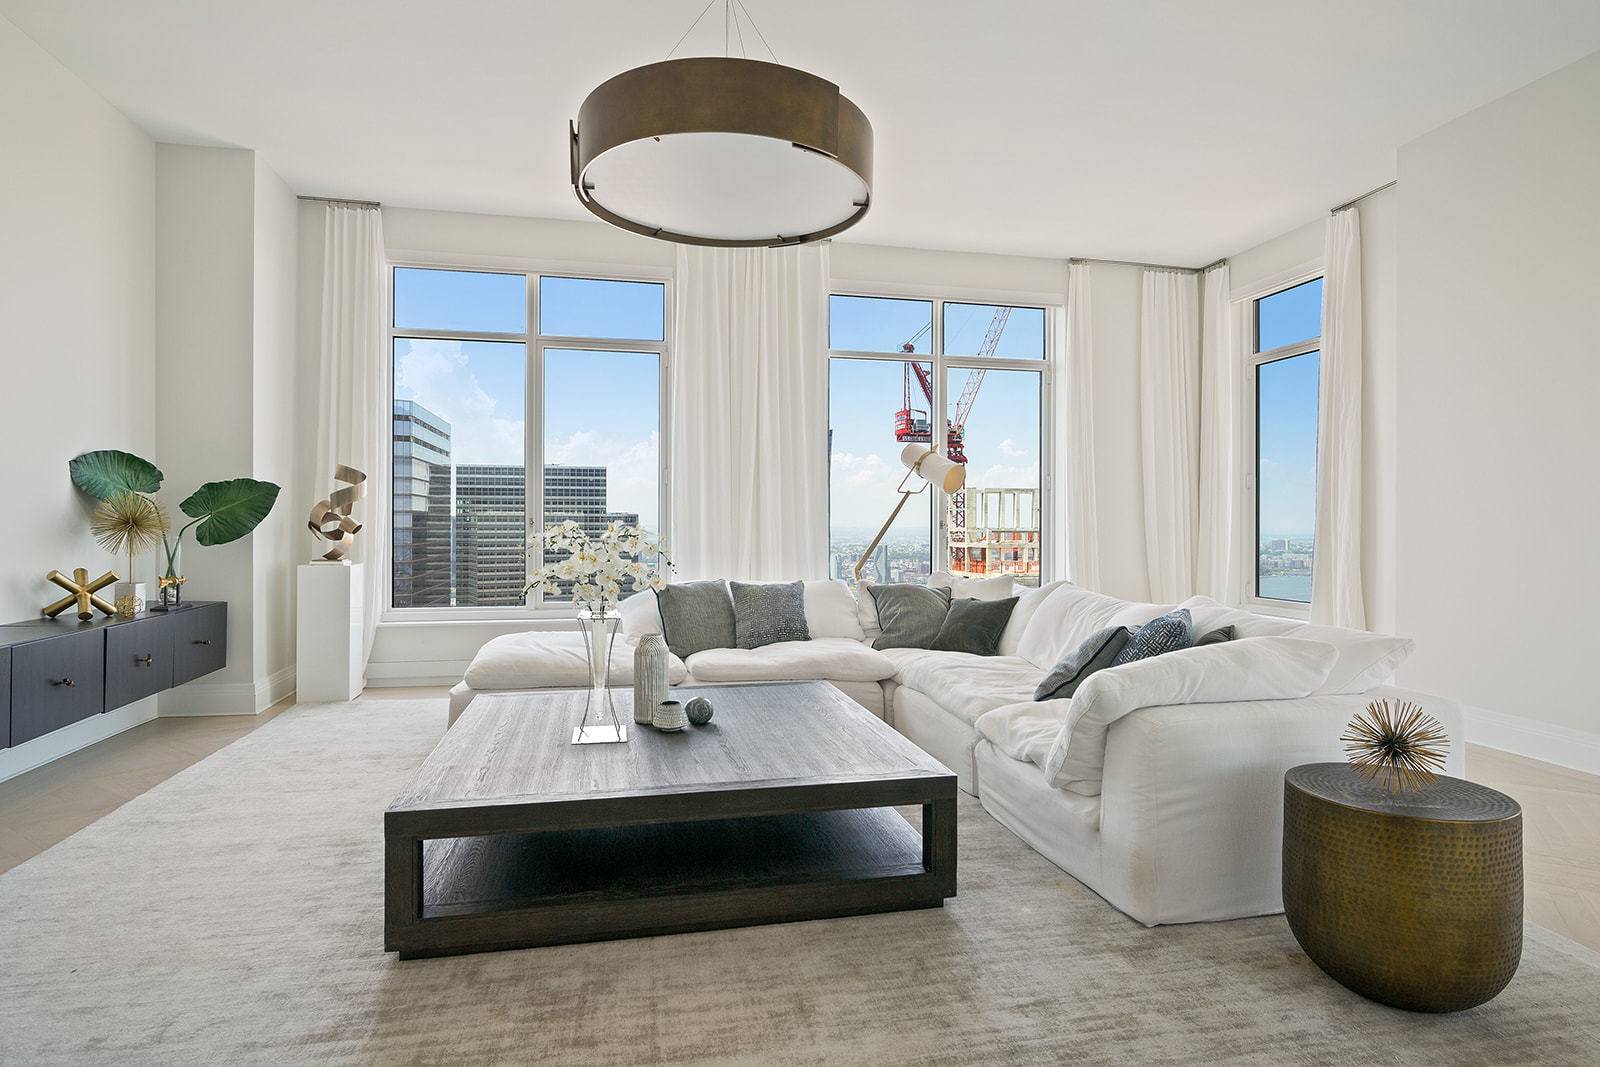 Enjoy all the 5 star amenities that the Four Seasons Private Residences has to offer in this wonderfully spacious unit with 4 bedrooms, 5 baths, and breathtaking views of New ...